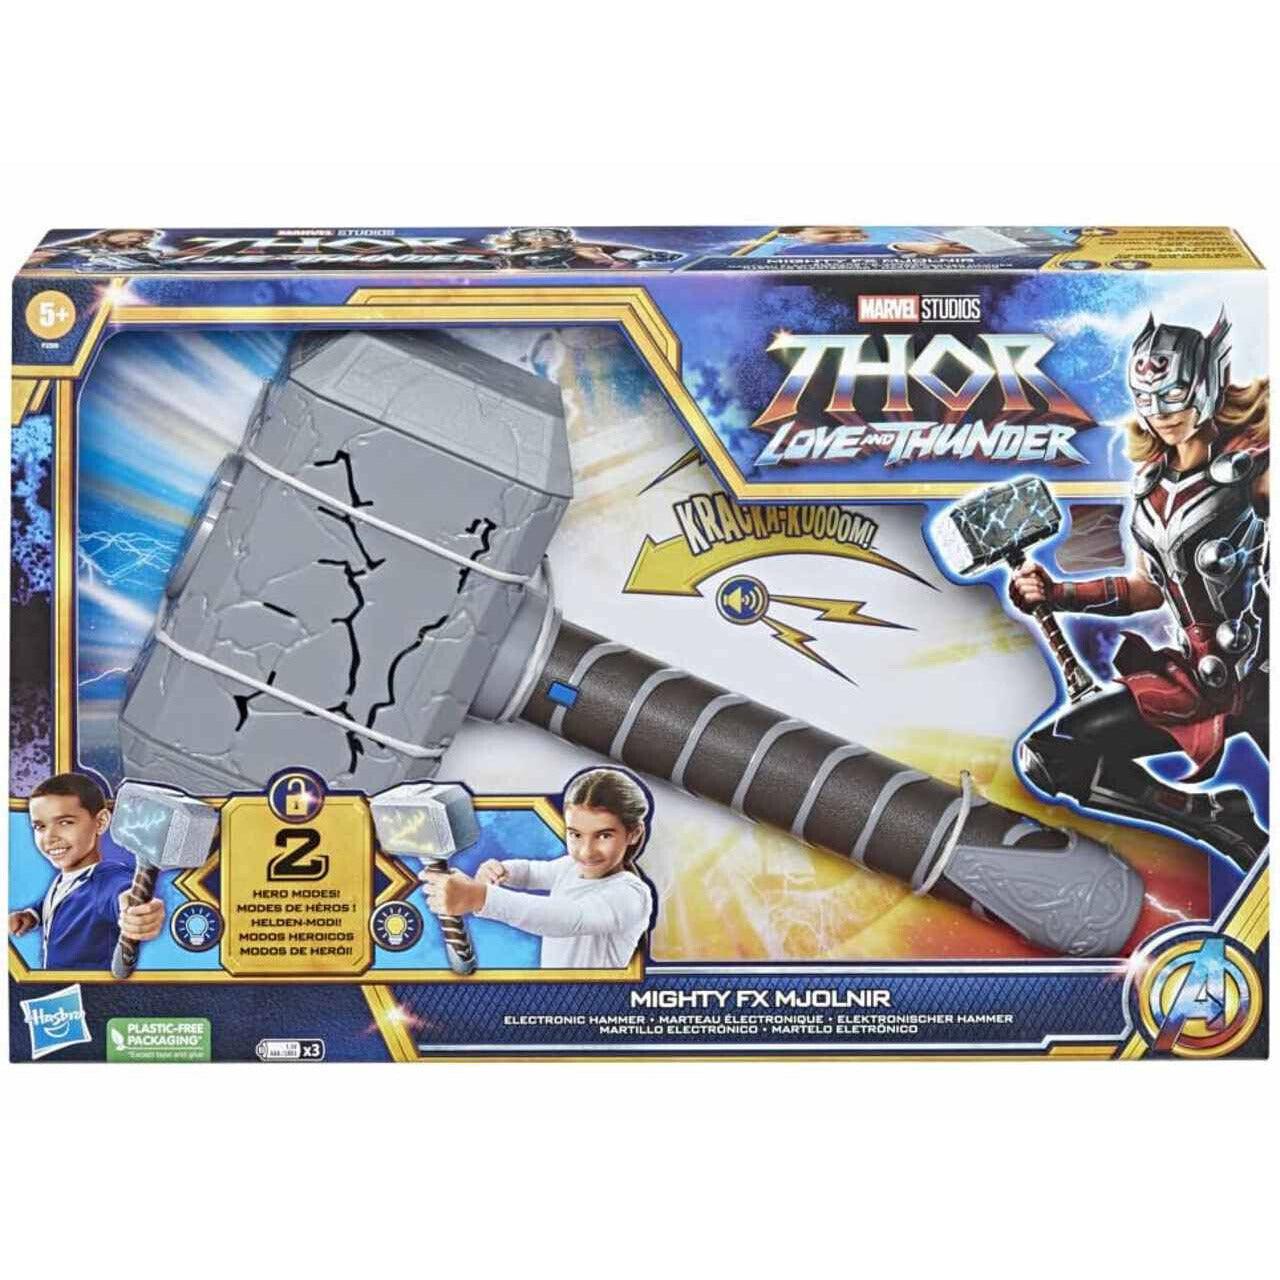 Marvel Studios Thor Love and Thunder - Mighty FX Mjolnir Electronic Hammer - BumbleToys - 8+ Years, 8-13 Years, Action Figures, Avengers, Boys, Eagle Plus, Figures, LEGO, Marvel, New Arrivals, OXE, Thor